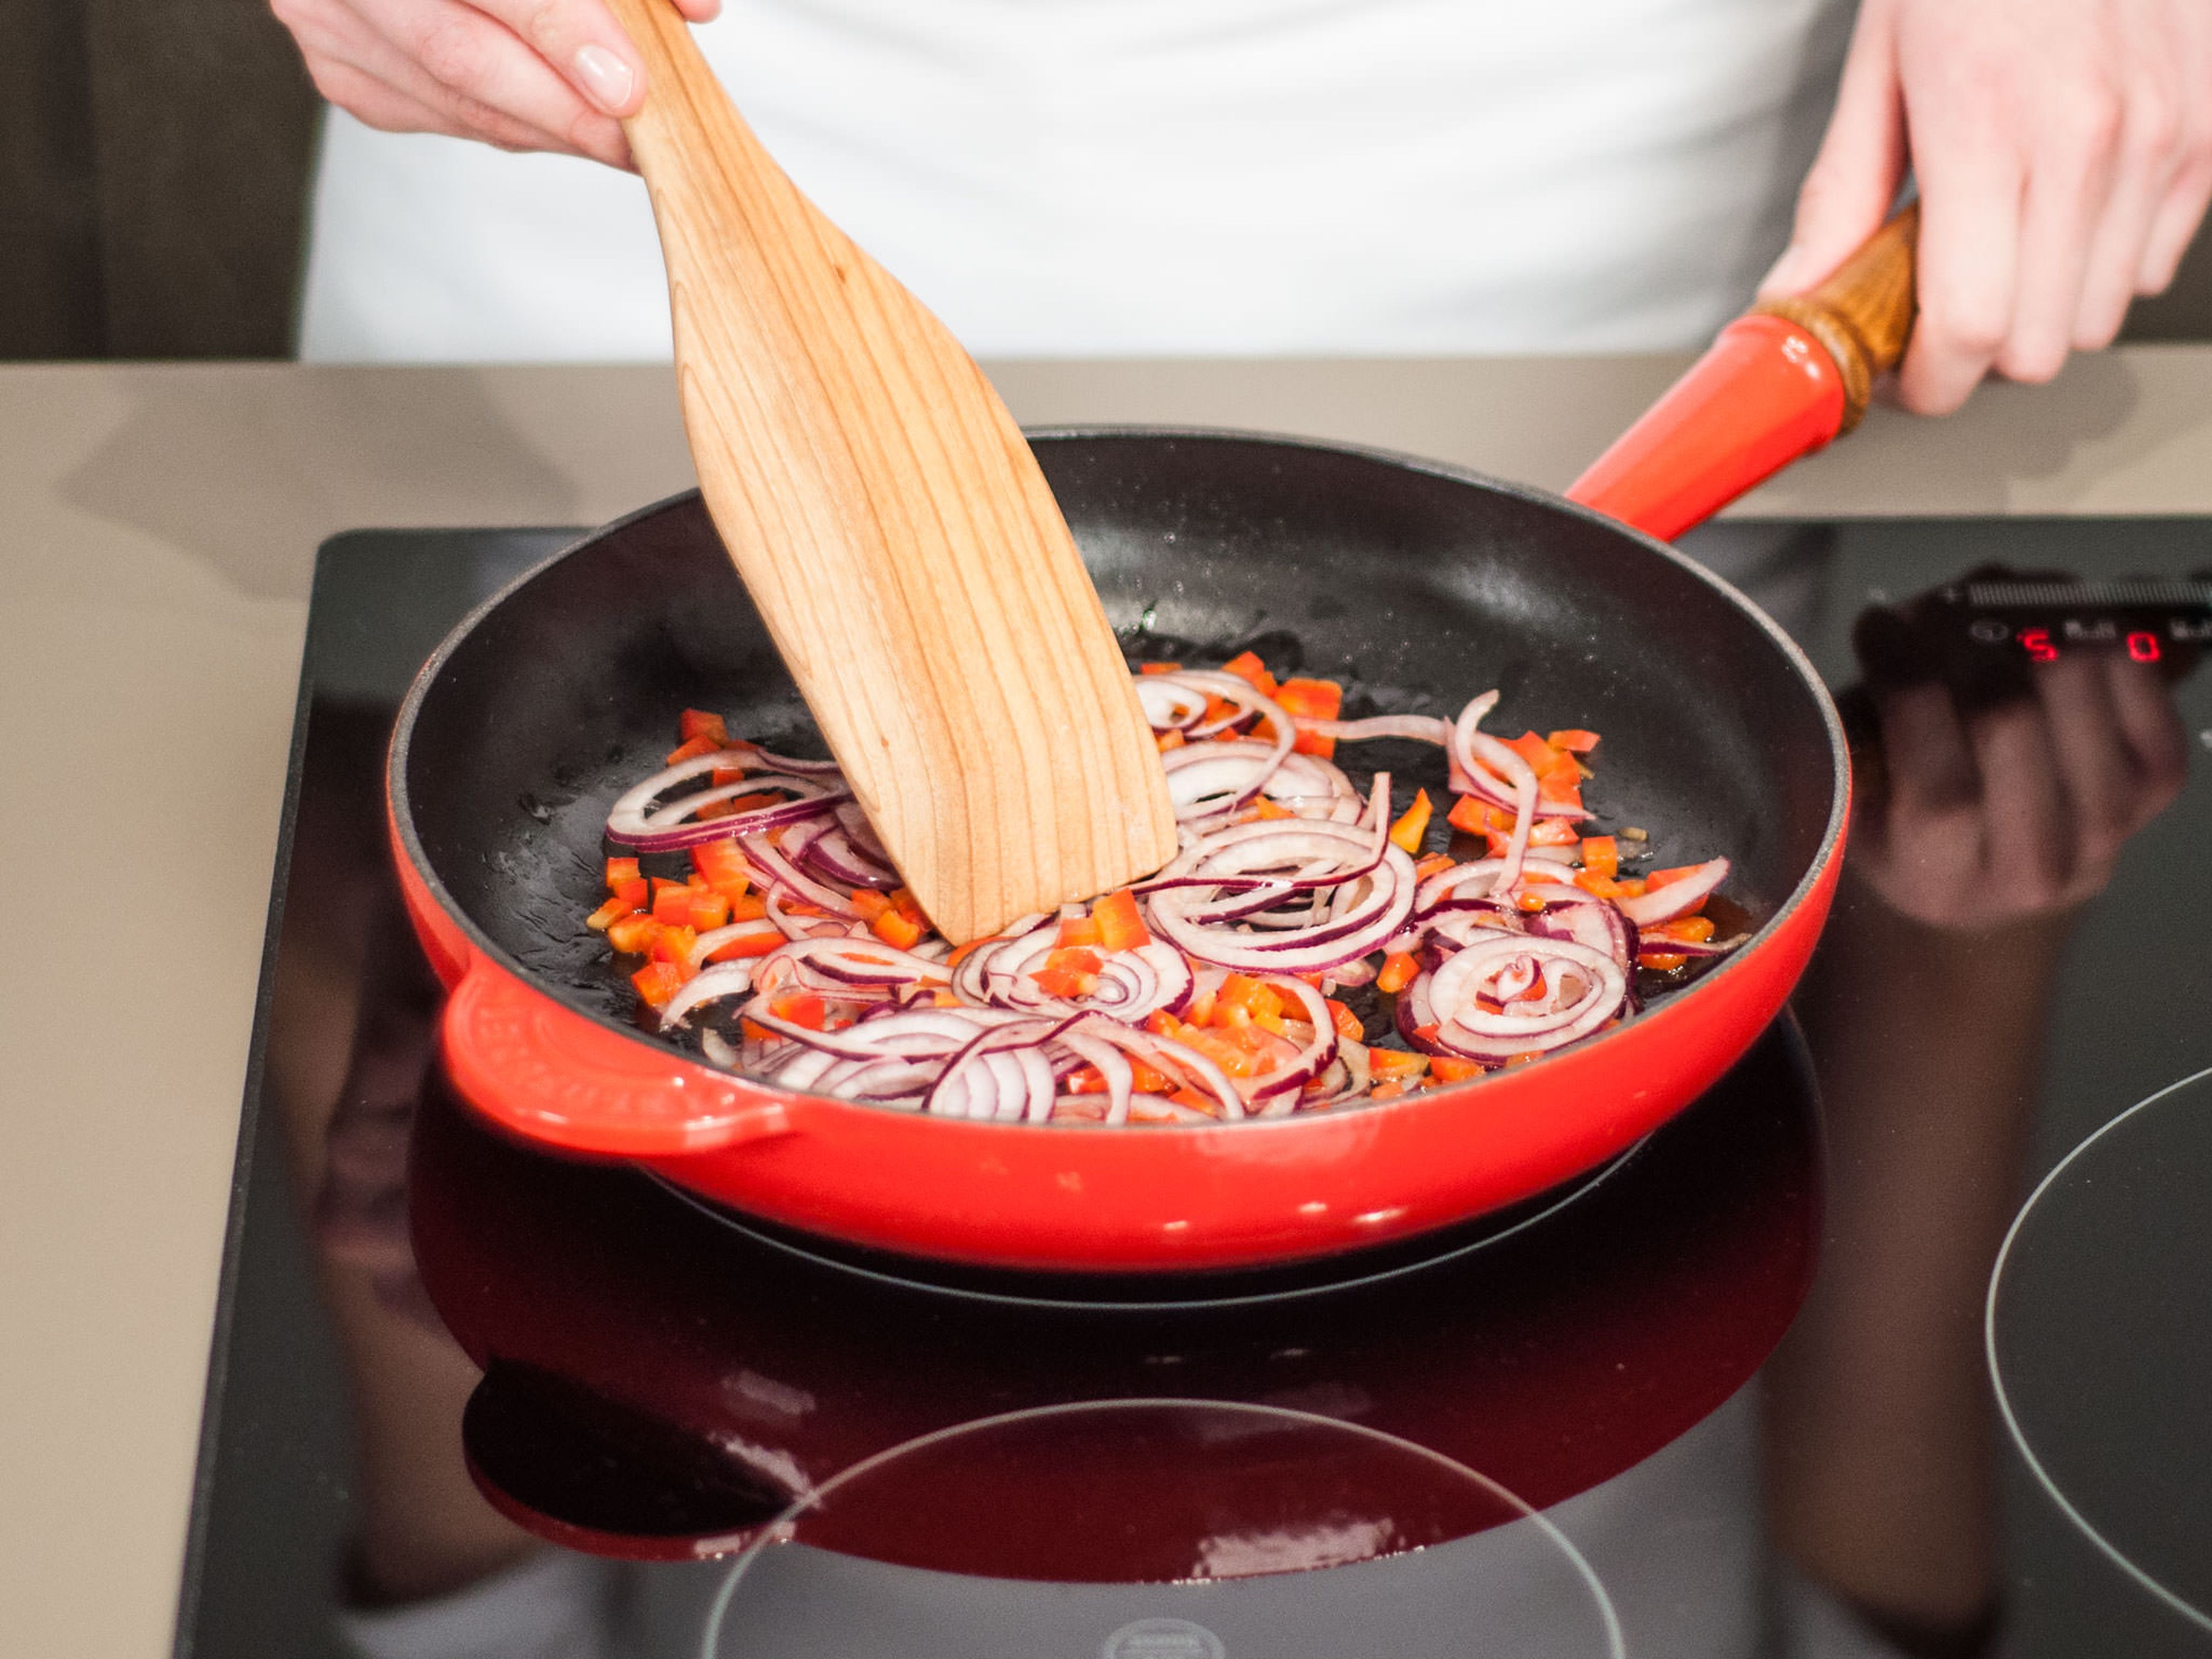 Heat up butter in a frying pan and sauté onions over medium heat for approx. 1 – 2 minutes. Then, add the bell pepper, VIVA LA SPICE seasoning (if using), and continue to sauté for an additional 2 – 3 min.